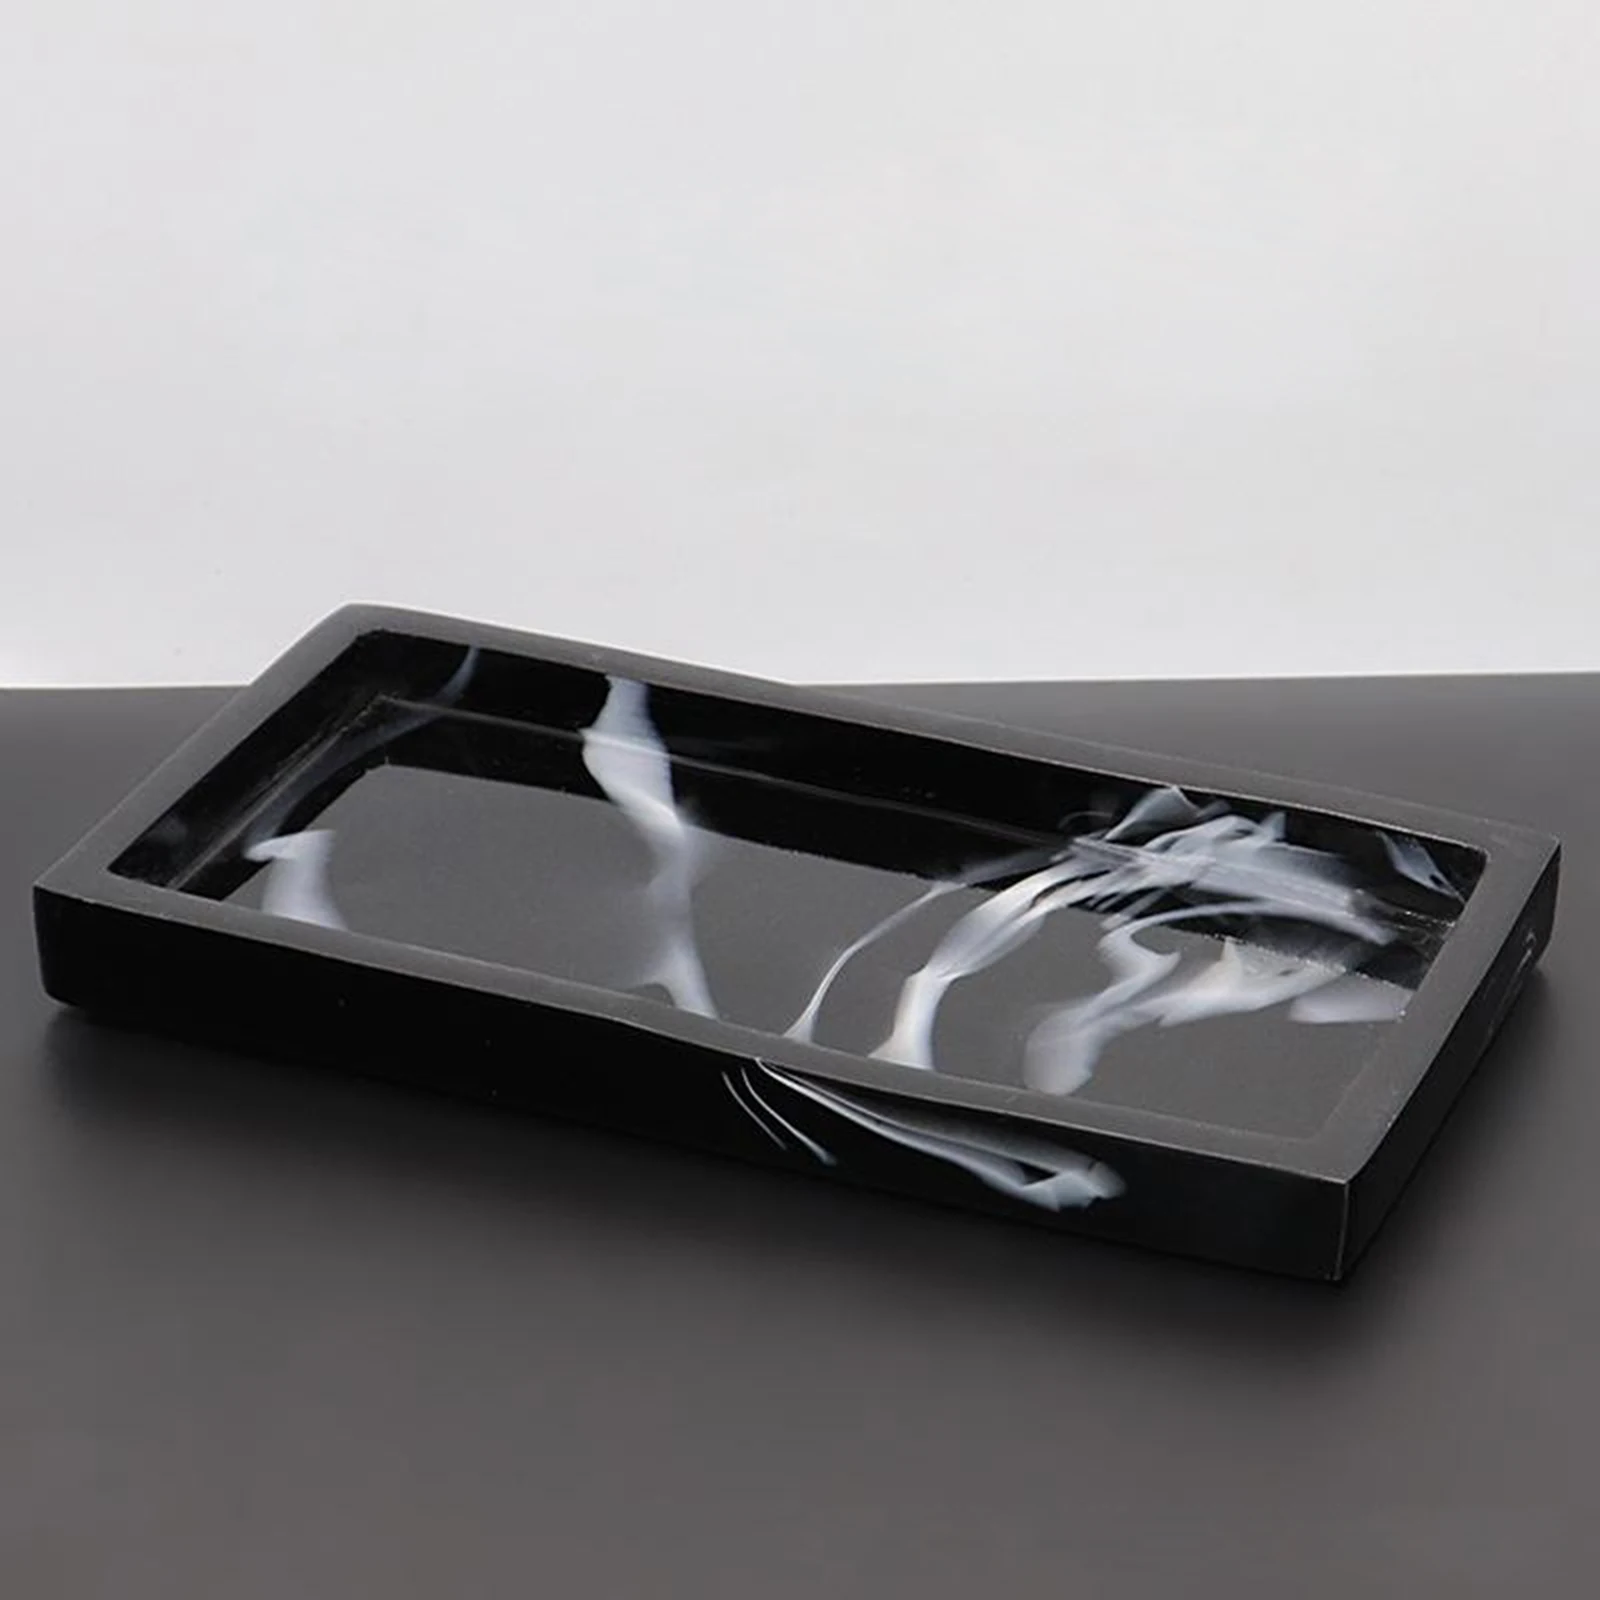 

Bathroom Tank Tray Resin Bathtub Serving Tray Plate Dresser Countertop Dispenser Rectangular for Candles Soap Cosmetic Towel